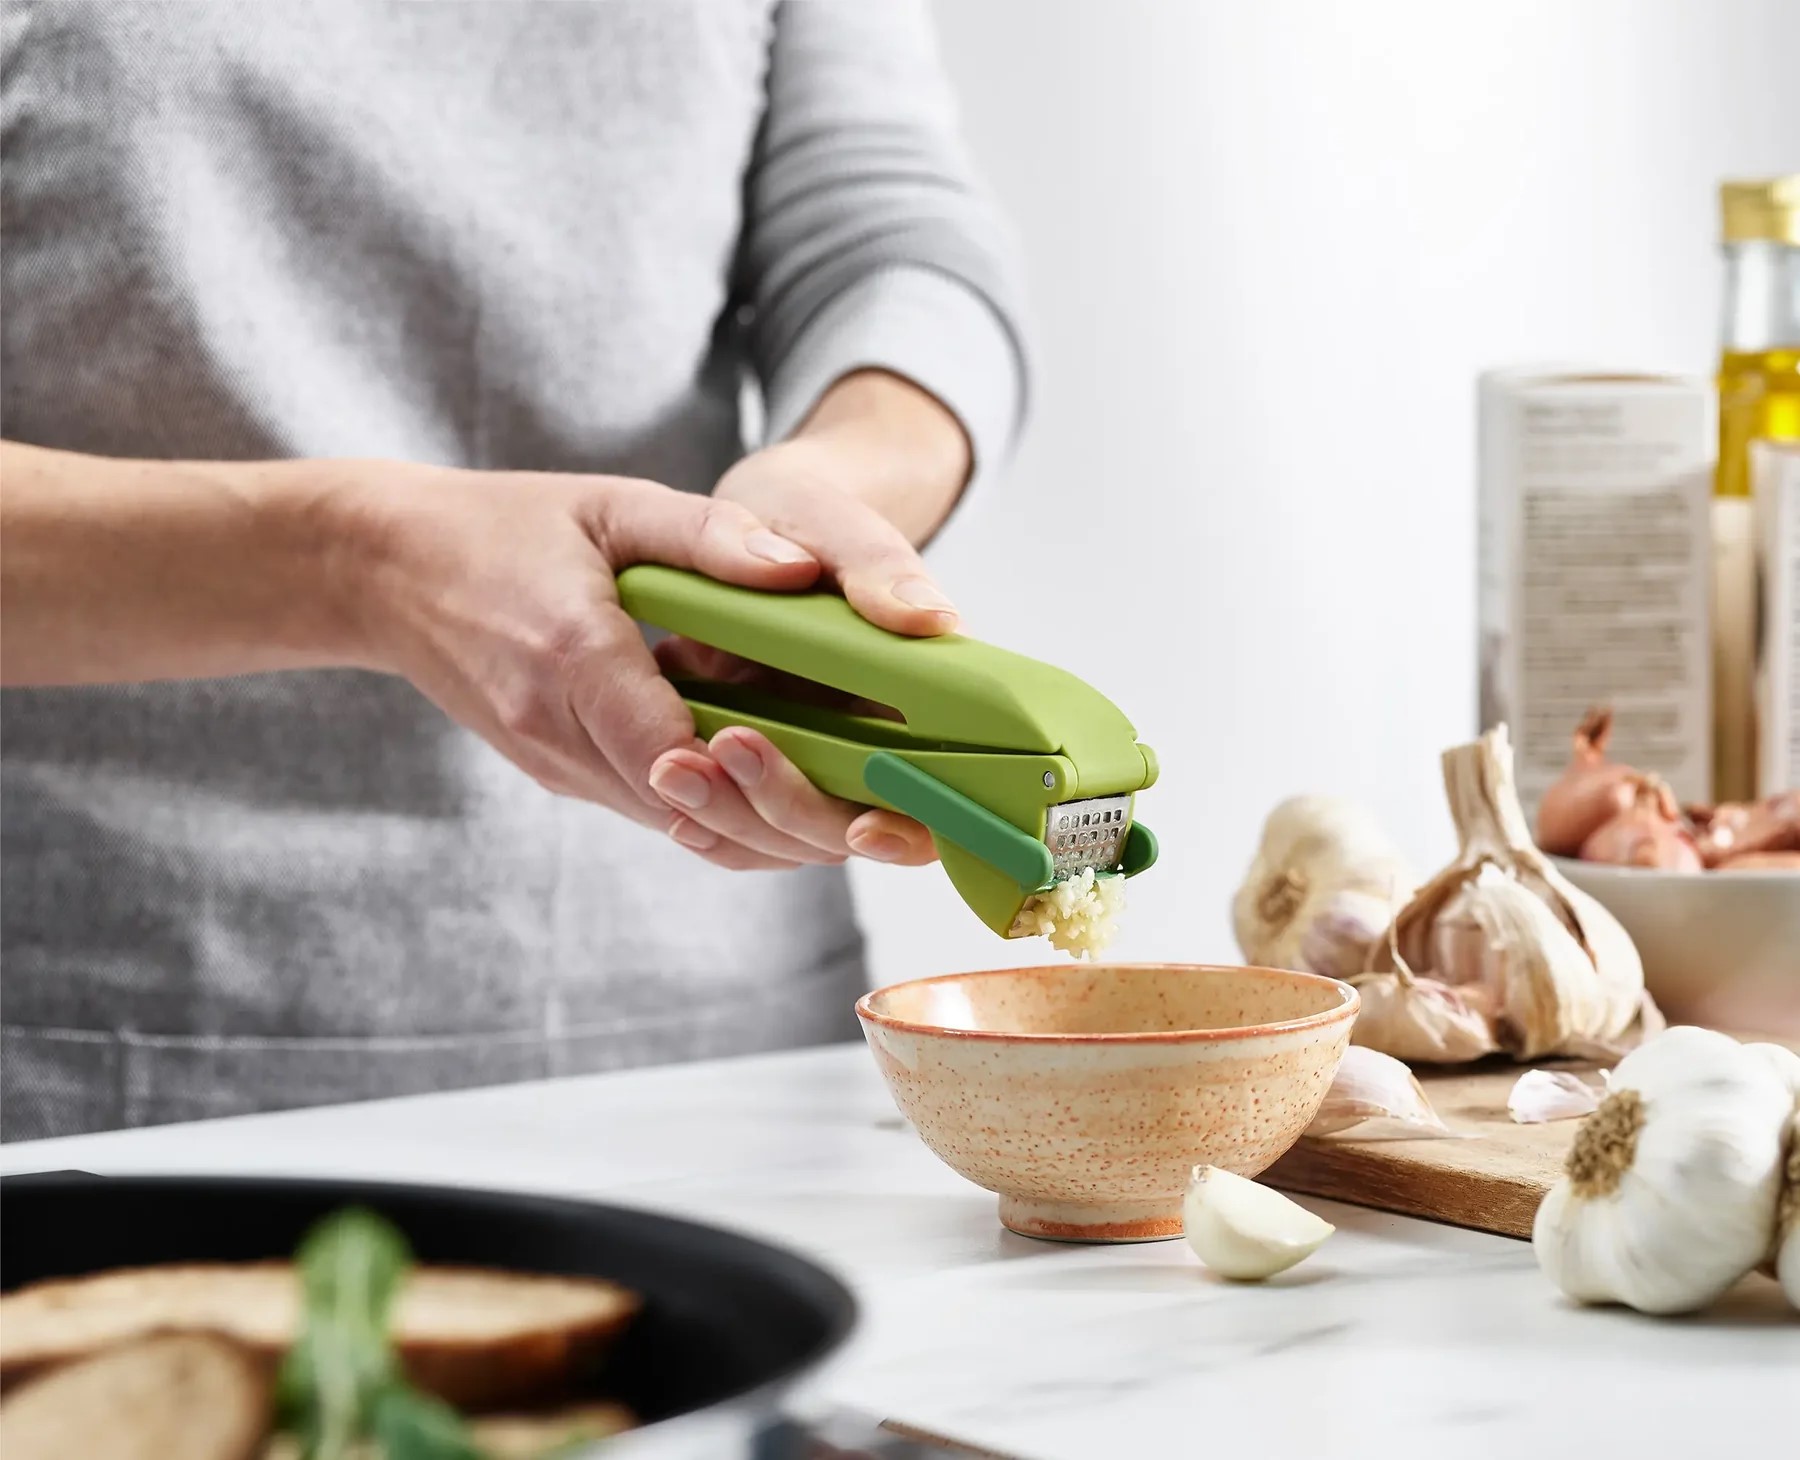 Garlic Press Review: Find the Best One for Your Kitchen